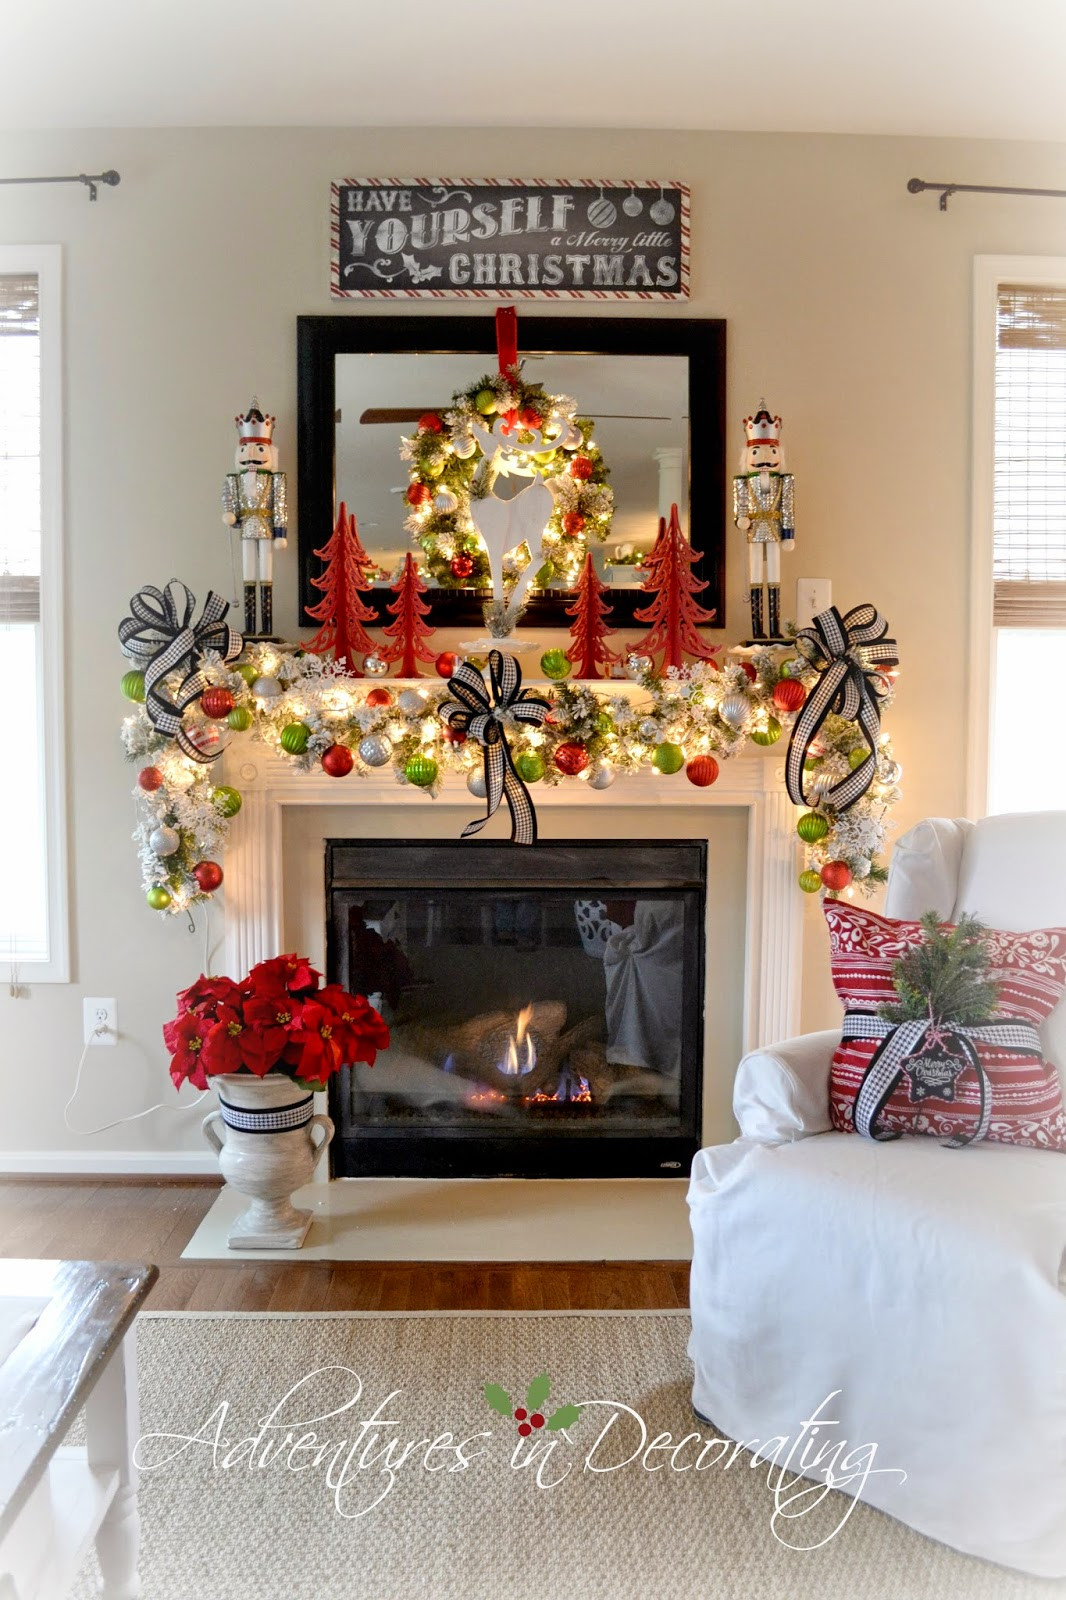 Christmas Fireplace Ideas
 Adventures in Decorating Our 2014 Christmas Mantel and